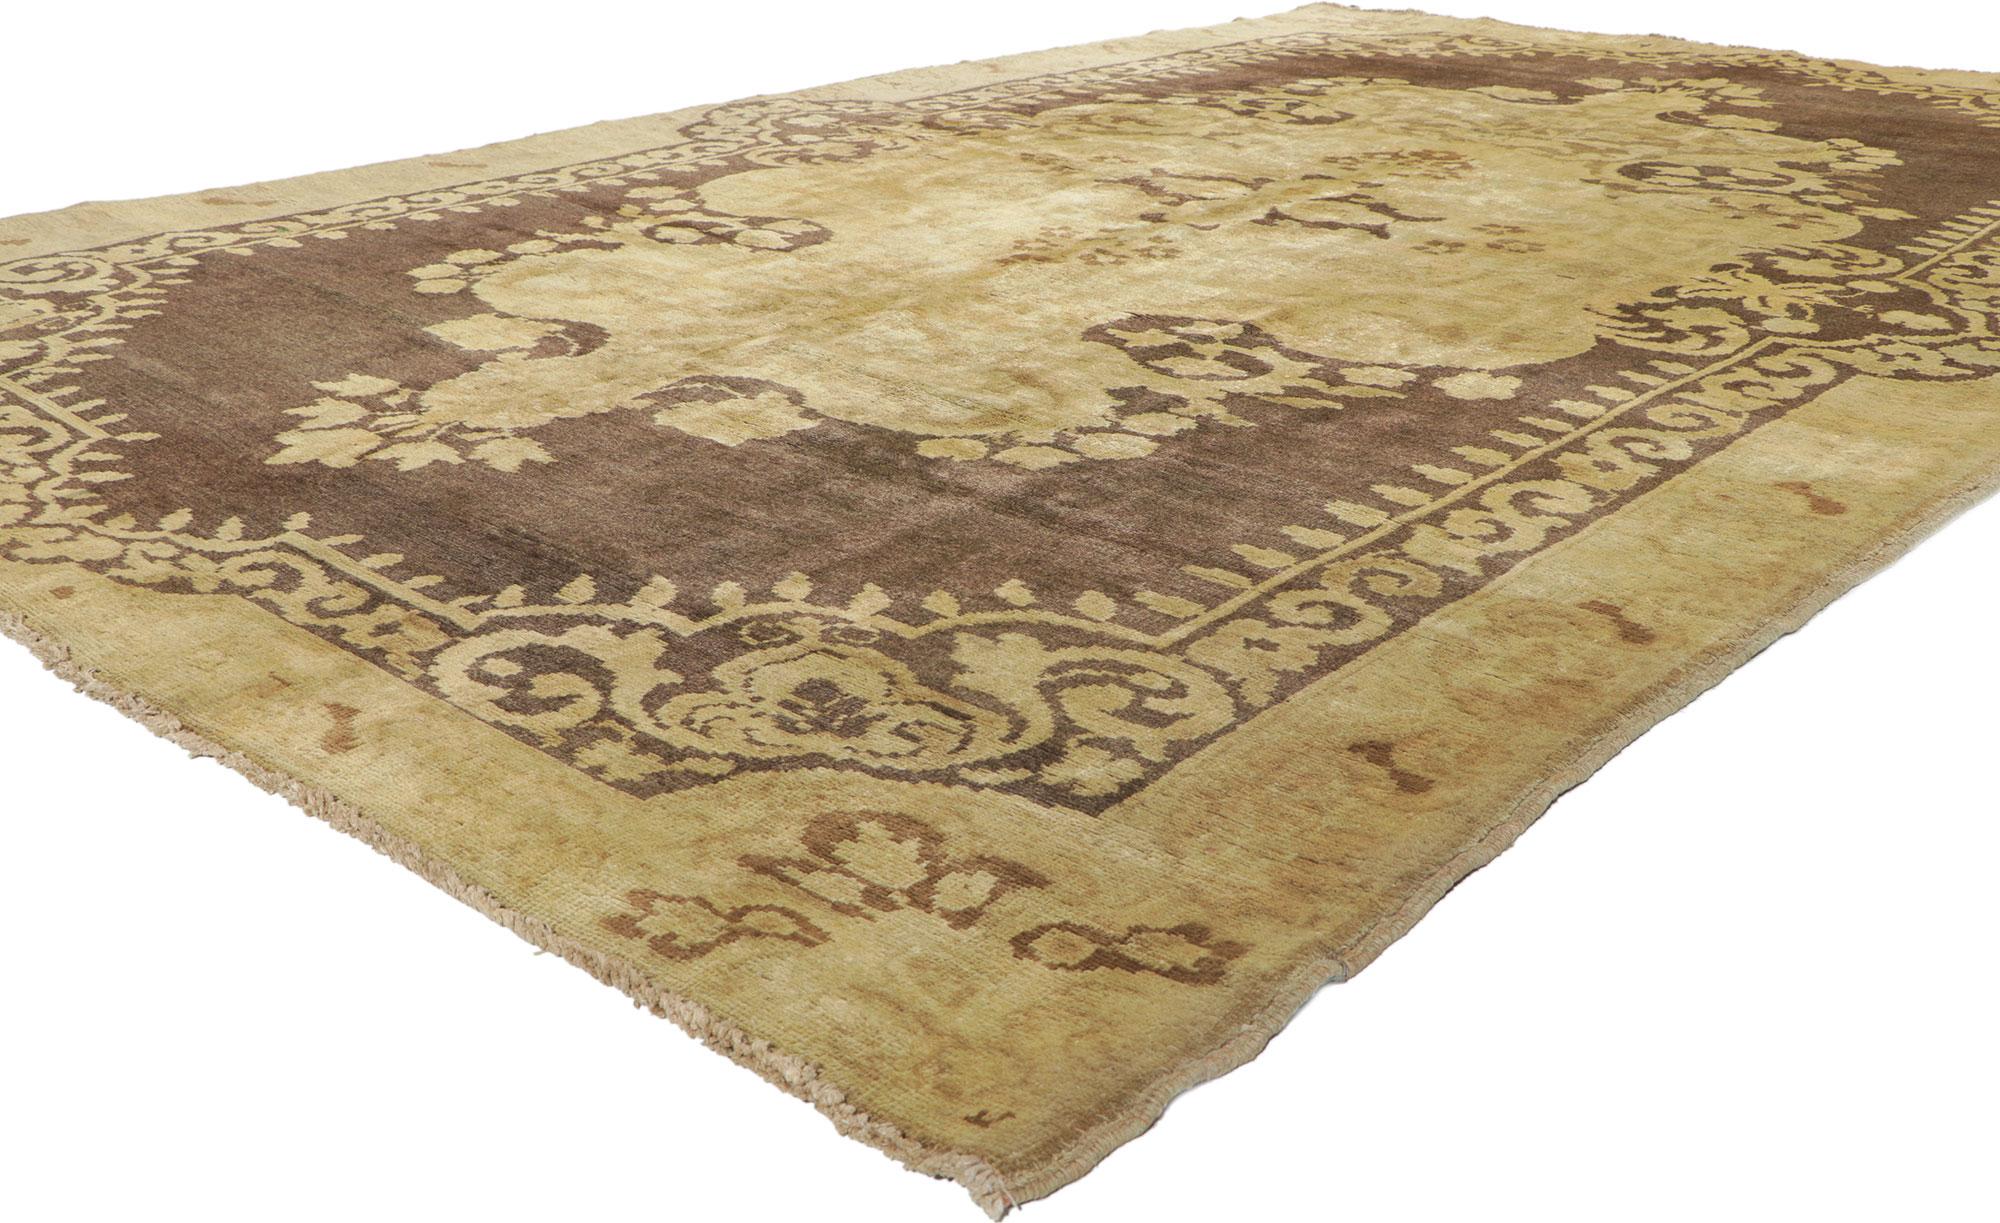 50042 Vintage Turkish Oushak Rug with Warm, Neutral Colors 06’11 x 11’00 From Esmaili Rugs Collection. A grand golden hued filigree medallion with an undulating border replete with florals sits regally on a rich coffee colored field in this